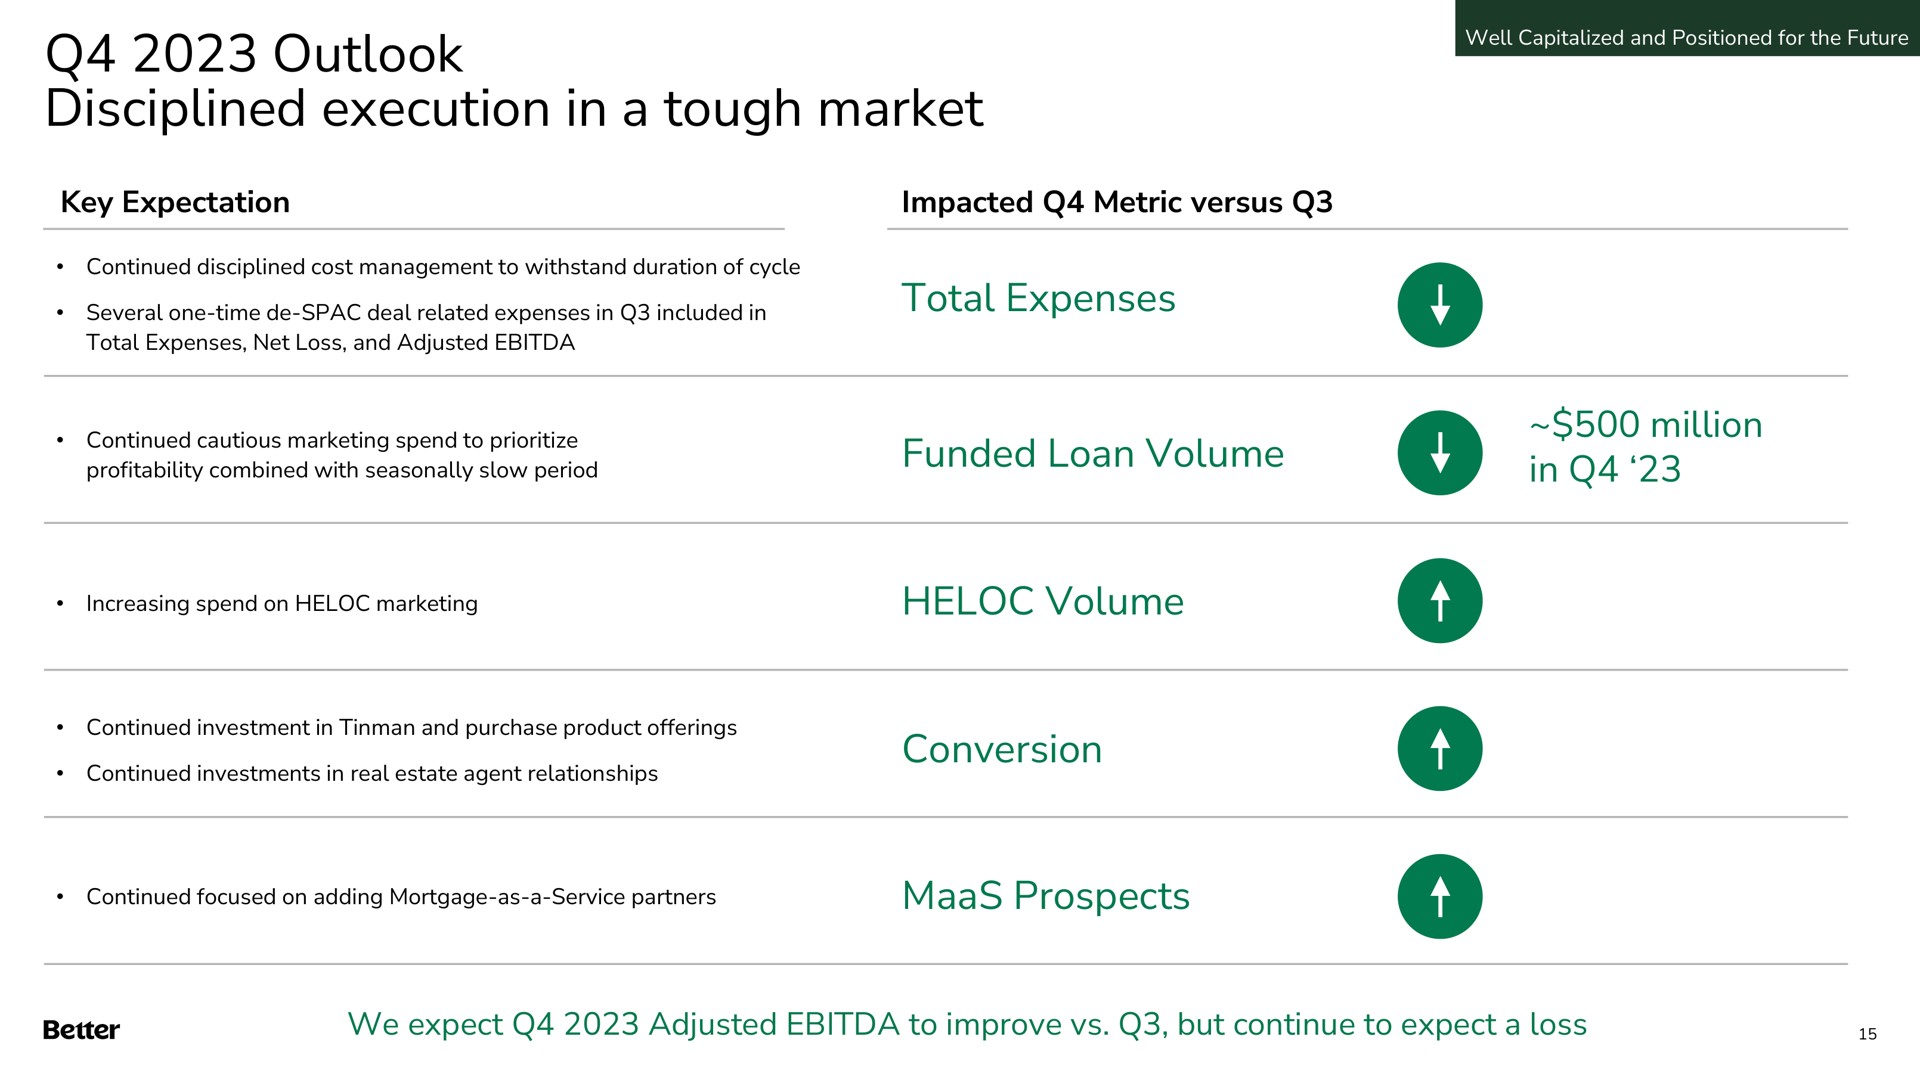 outlook disciplined execution in a tough market total expenses funded loan volume million in volume conversion prospects key expectation impacted metric versus better we expect adjusted to improve but continue to expect loss | Better